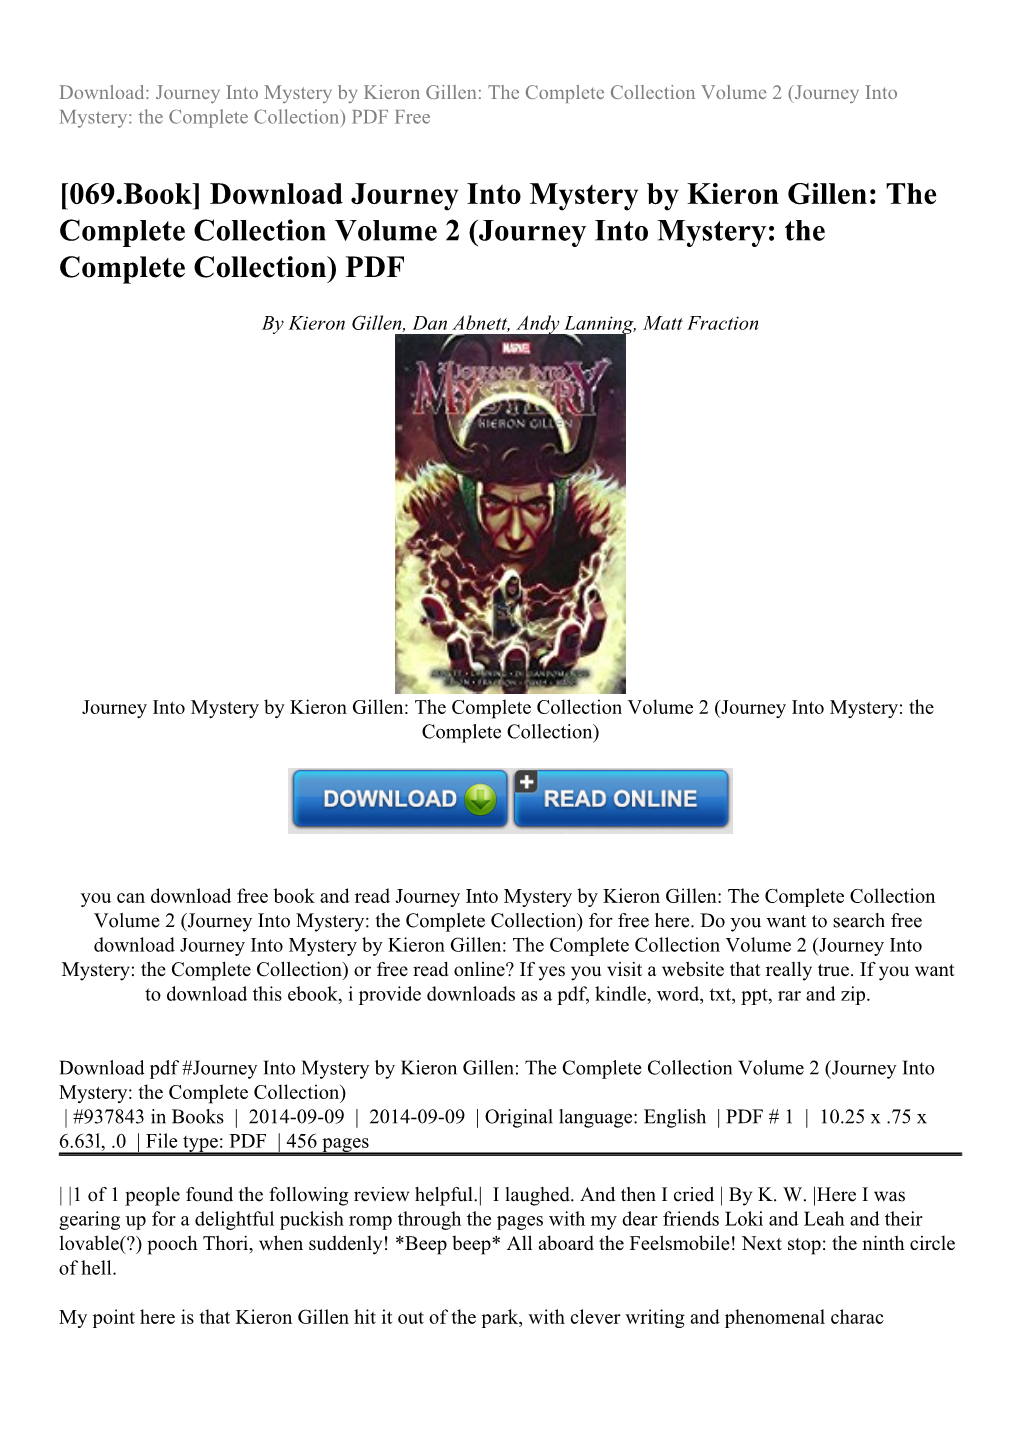 Download Journey Into Mystery by Kieron Gillen: the Complete Collection Volume 2 (Journey Into Mystery: the Complete Collection) PDF